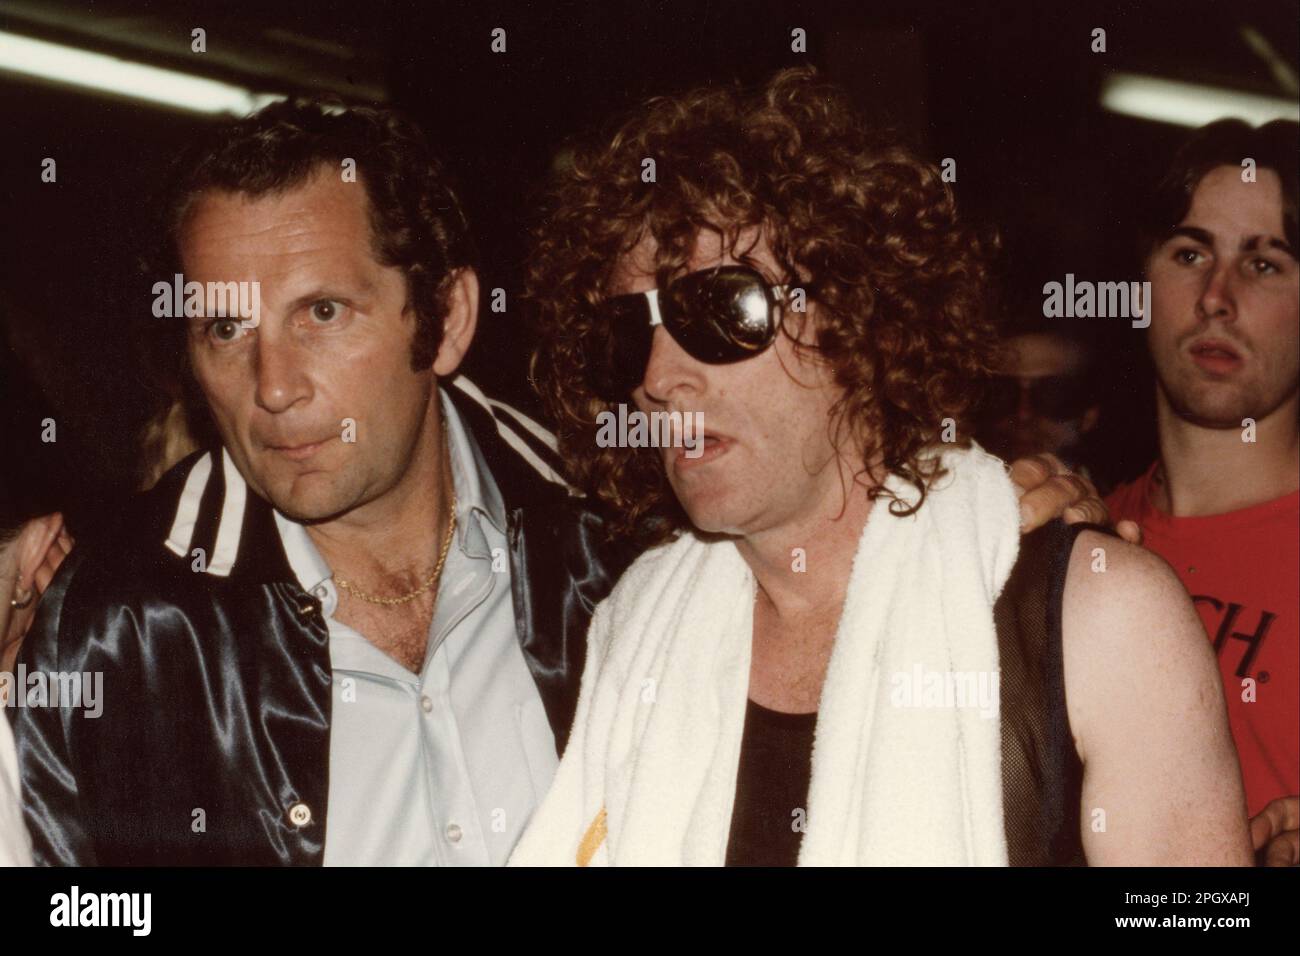 Security escorting Ian Hunter to his dressing room at Ocean State Performing Arts Center in Providence, Rhode Island, October 6, 1980. Stock Photo